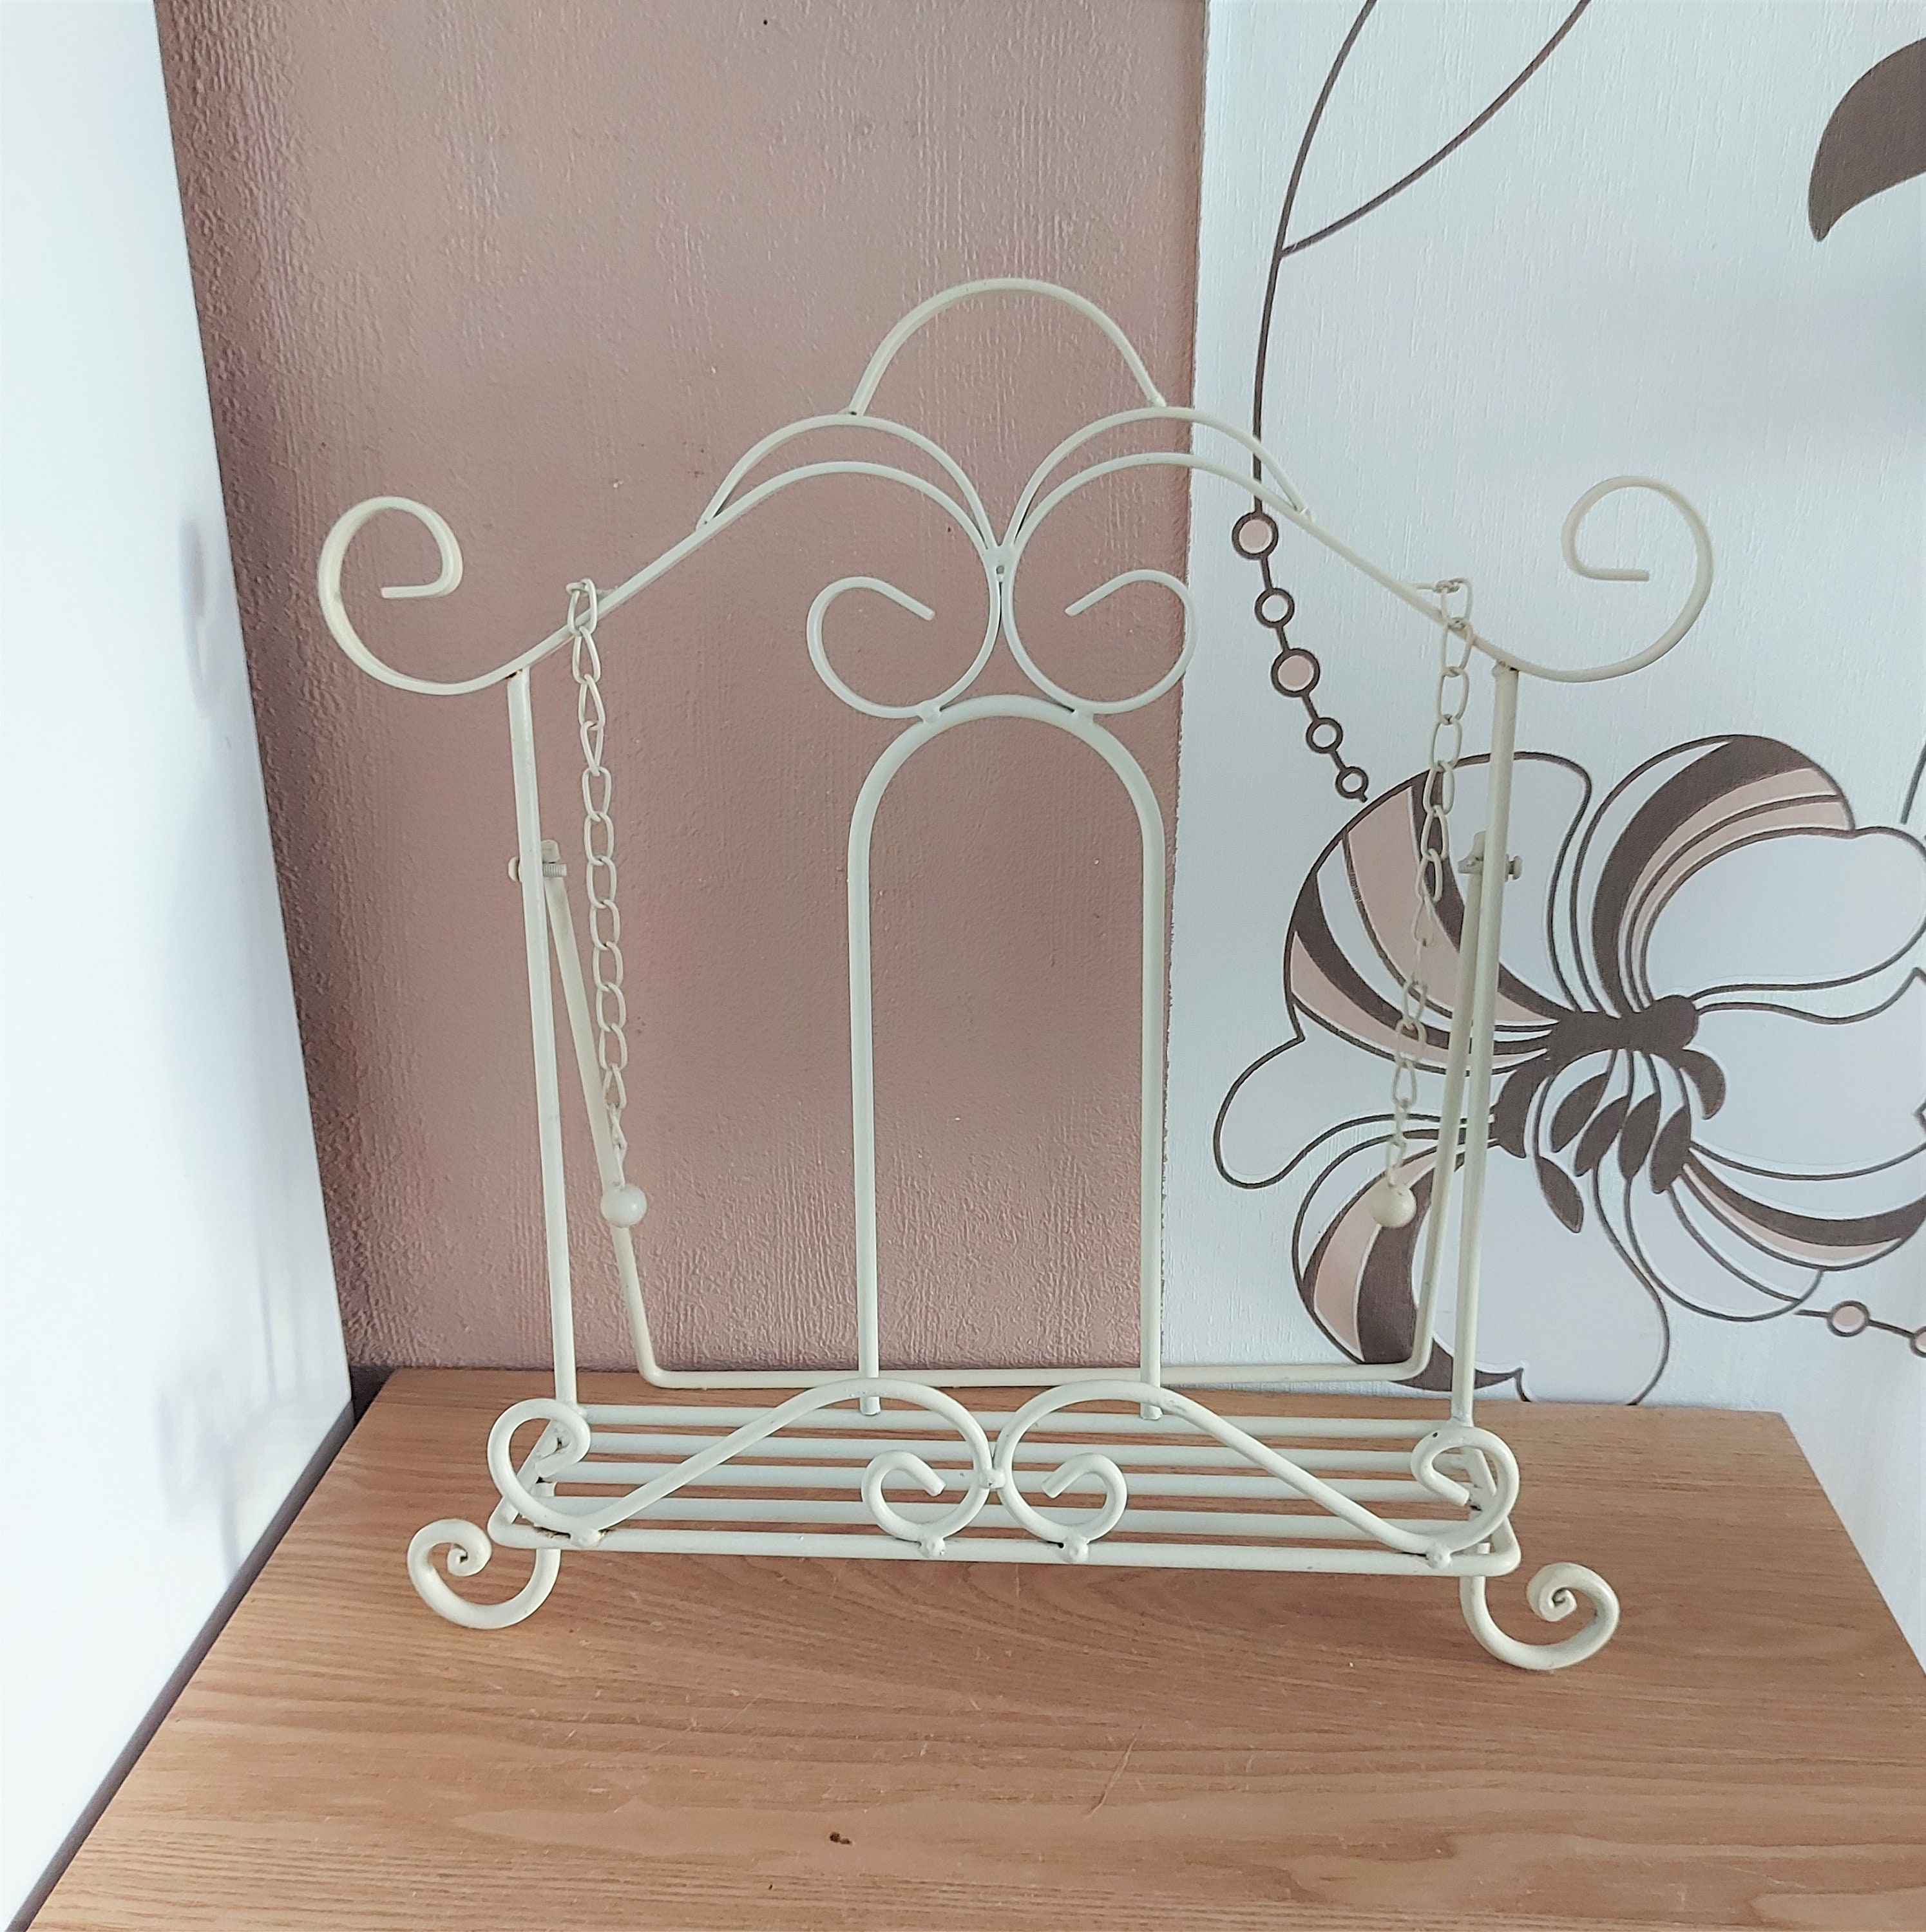 METAL BOOK STAND IN DISTRESSED WHITE FINISH